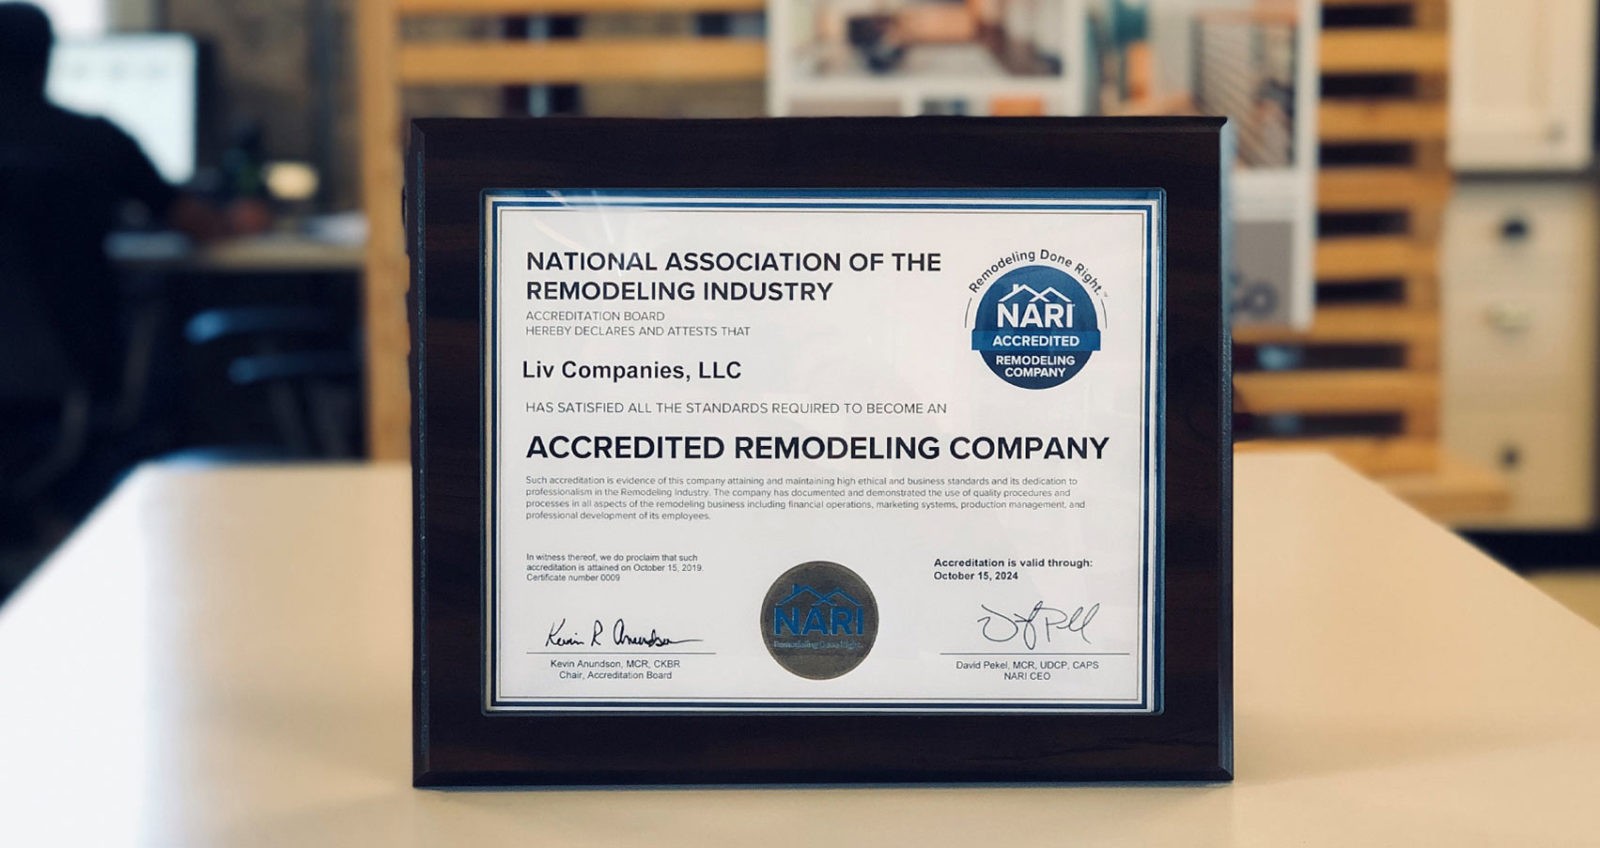 certificate received from the National Association of the Remodleing Industry as an Accredited Remodeling Company